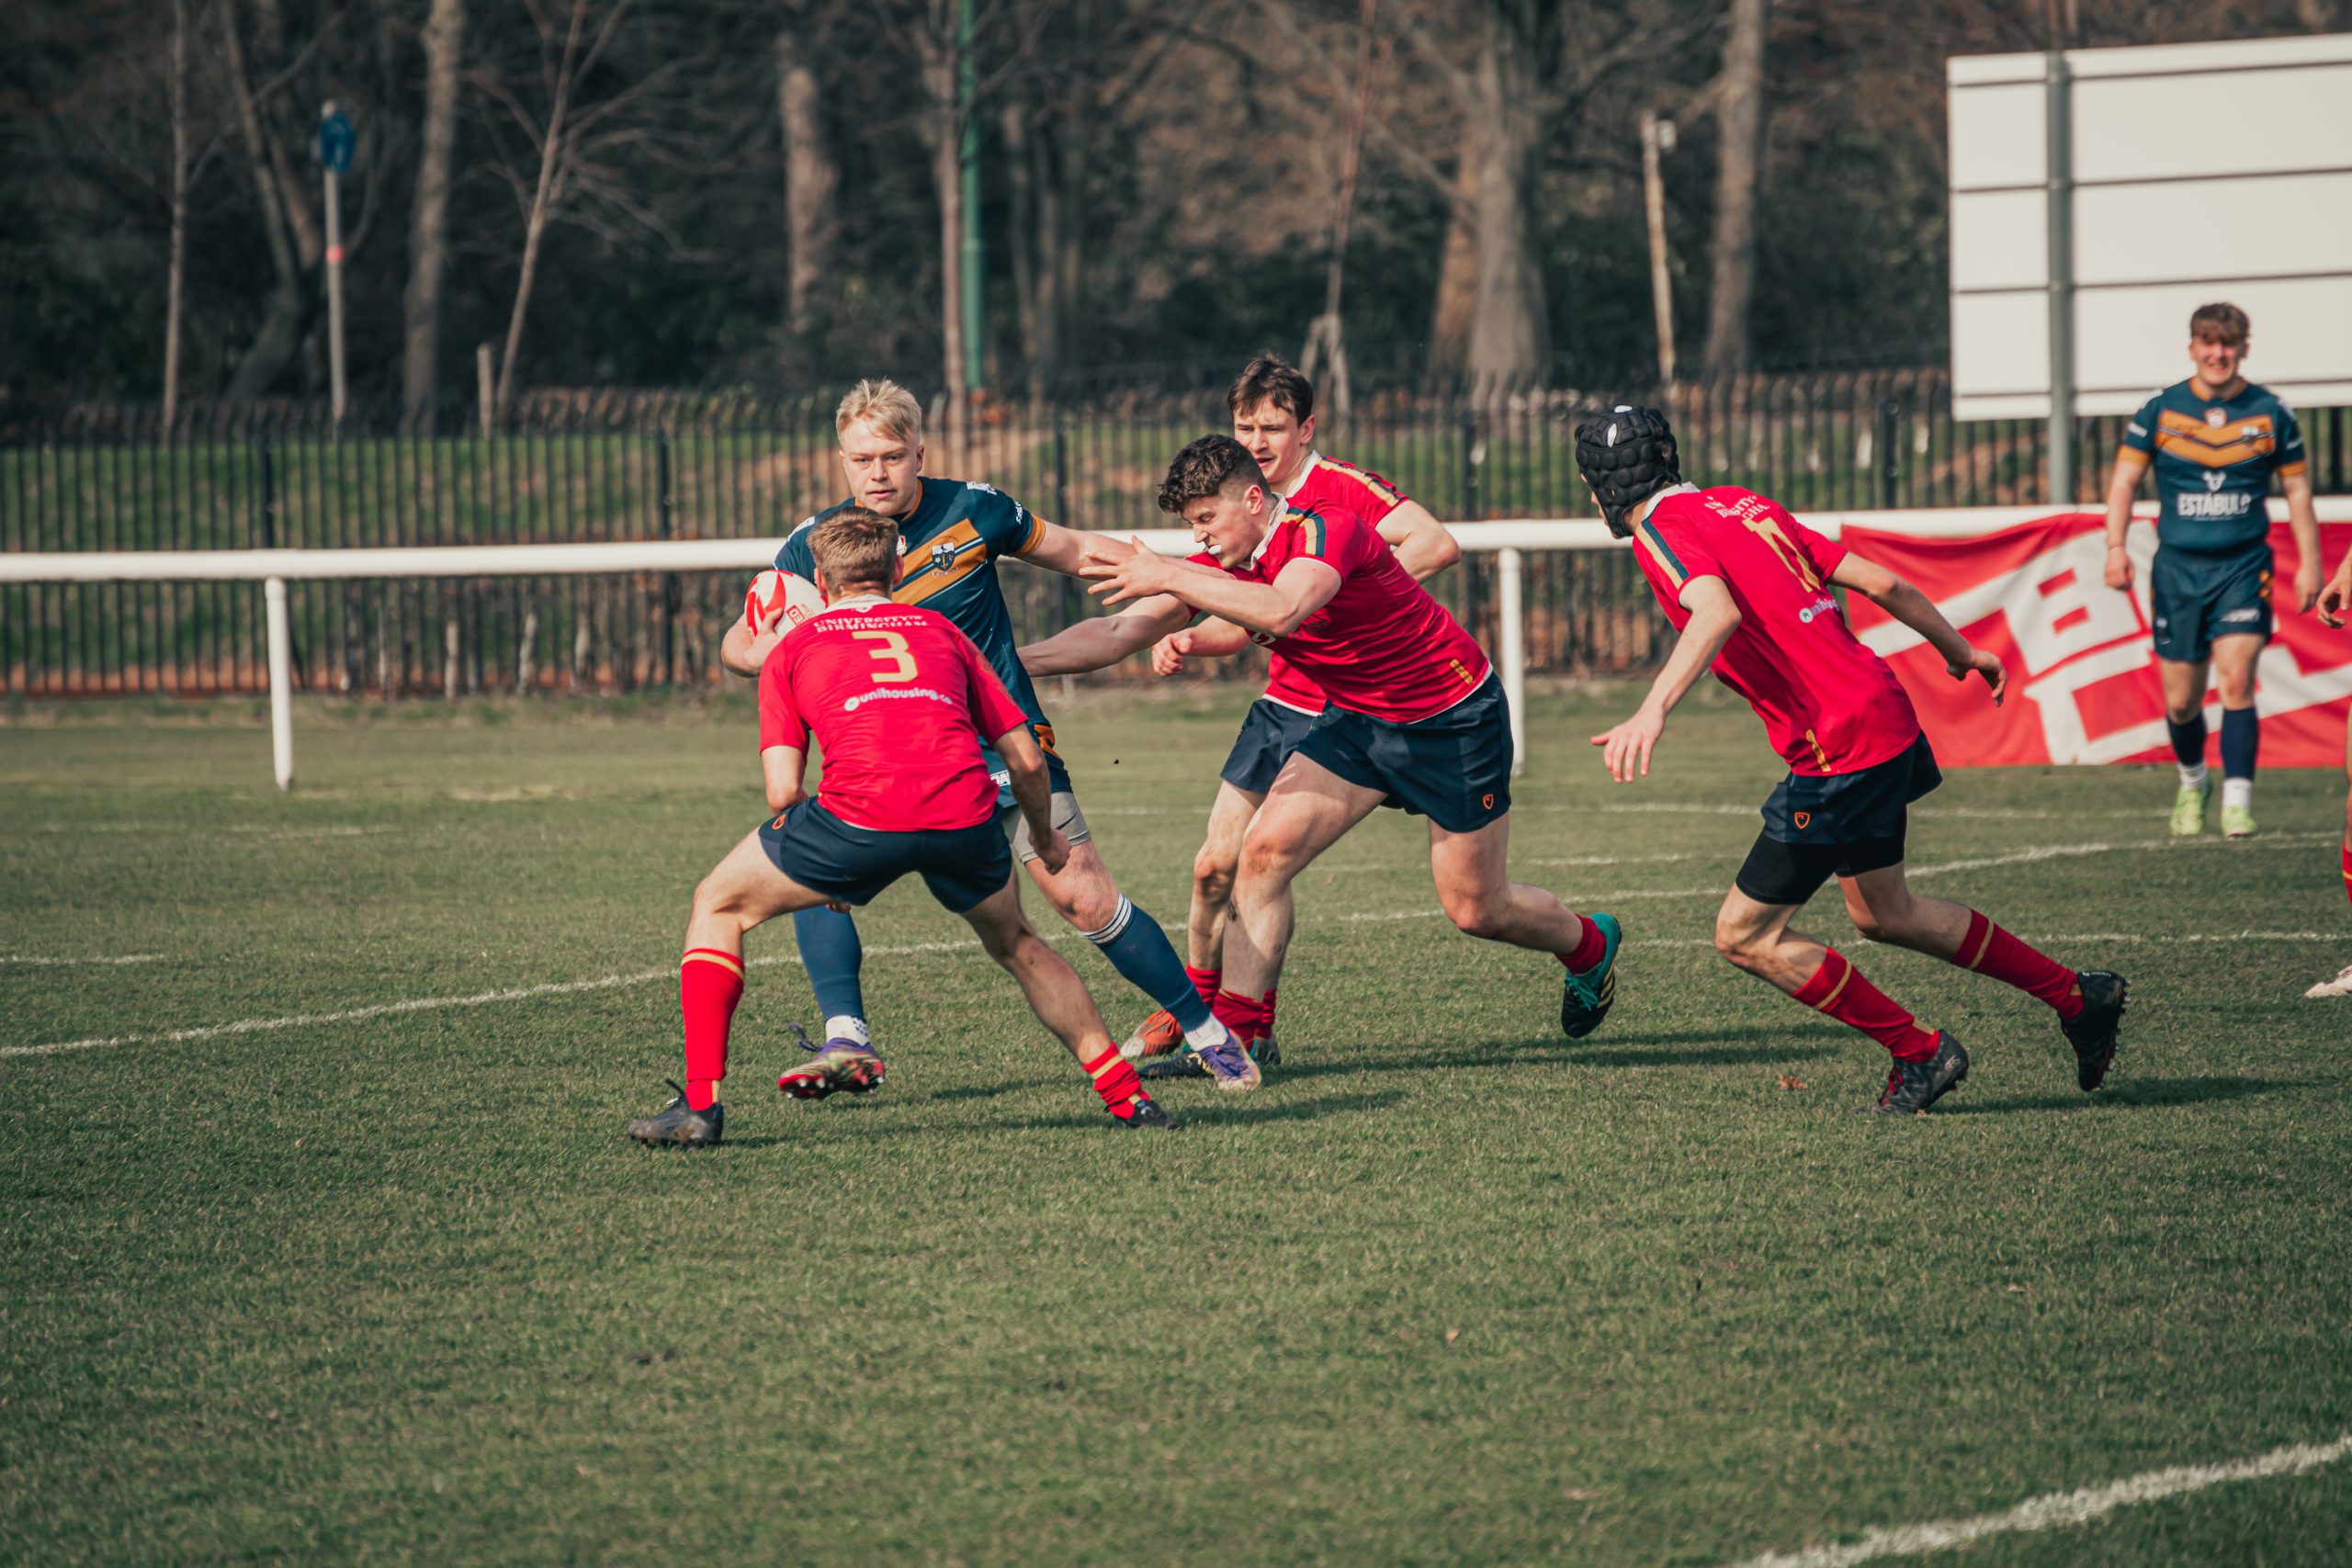 University of Birmingham rugby league players tackling a player with the ball